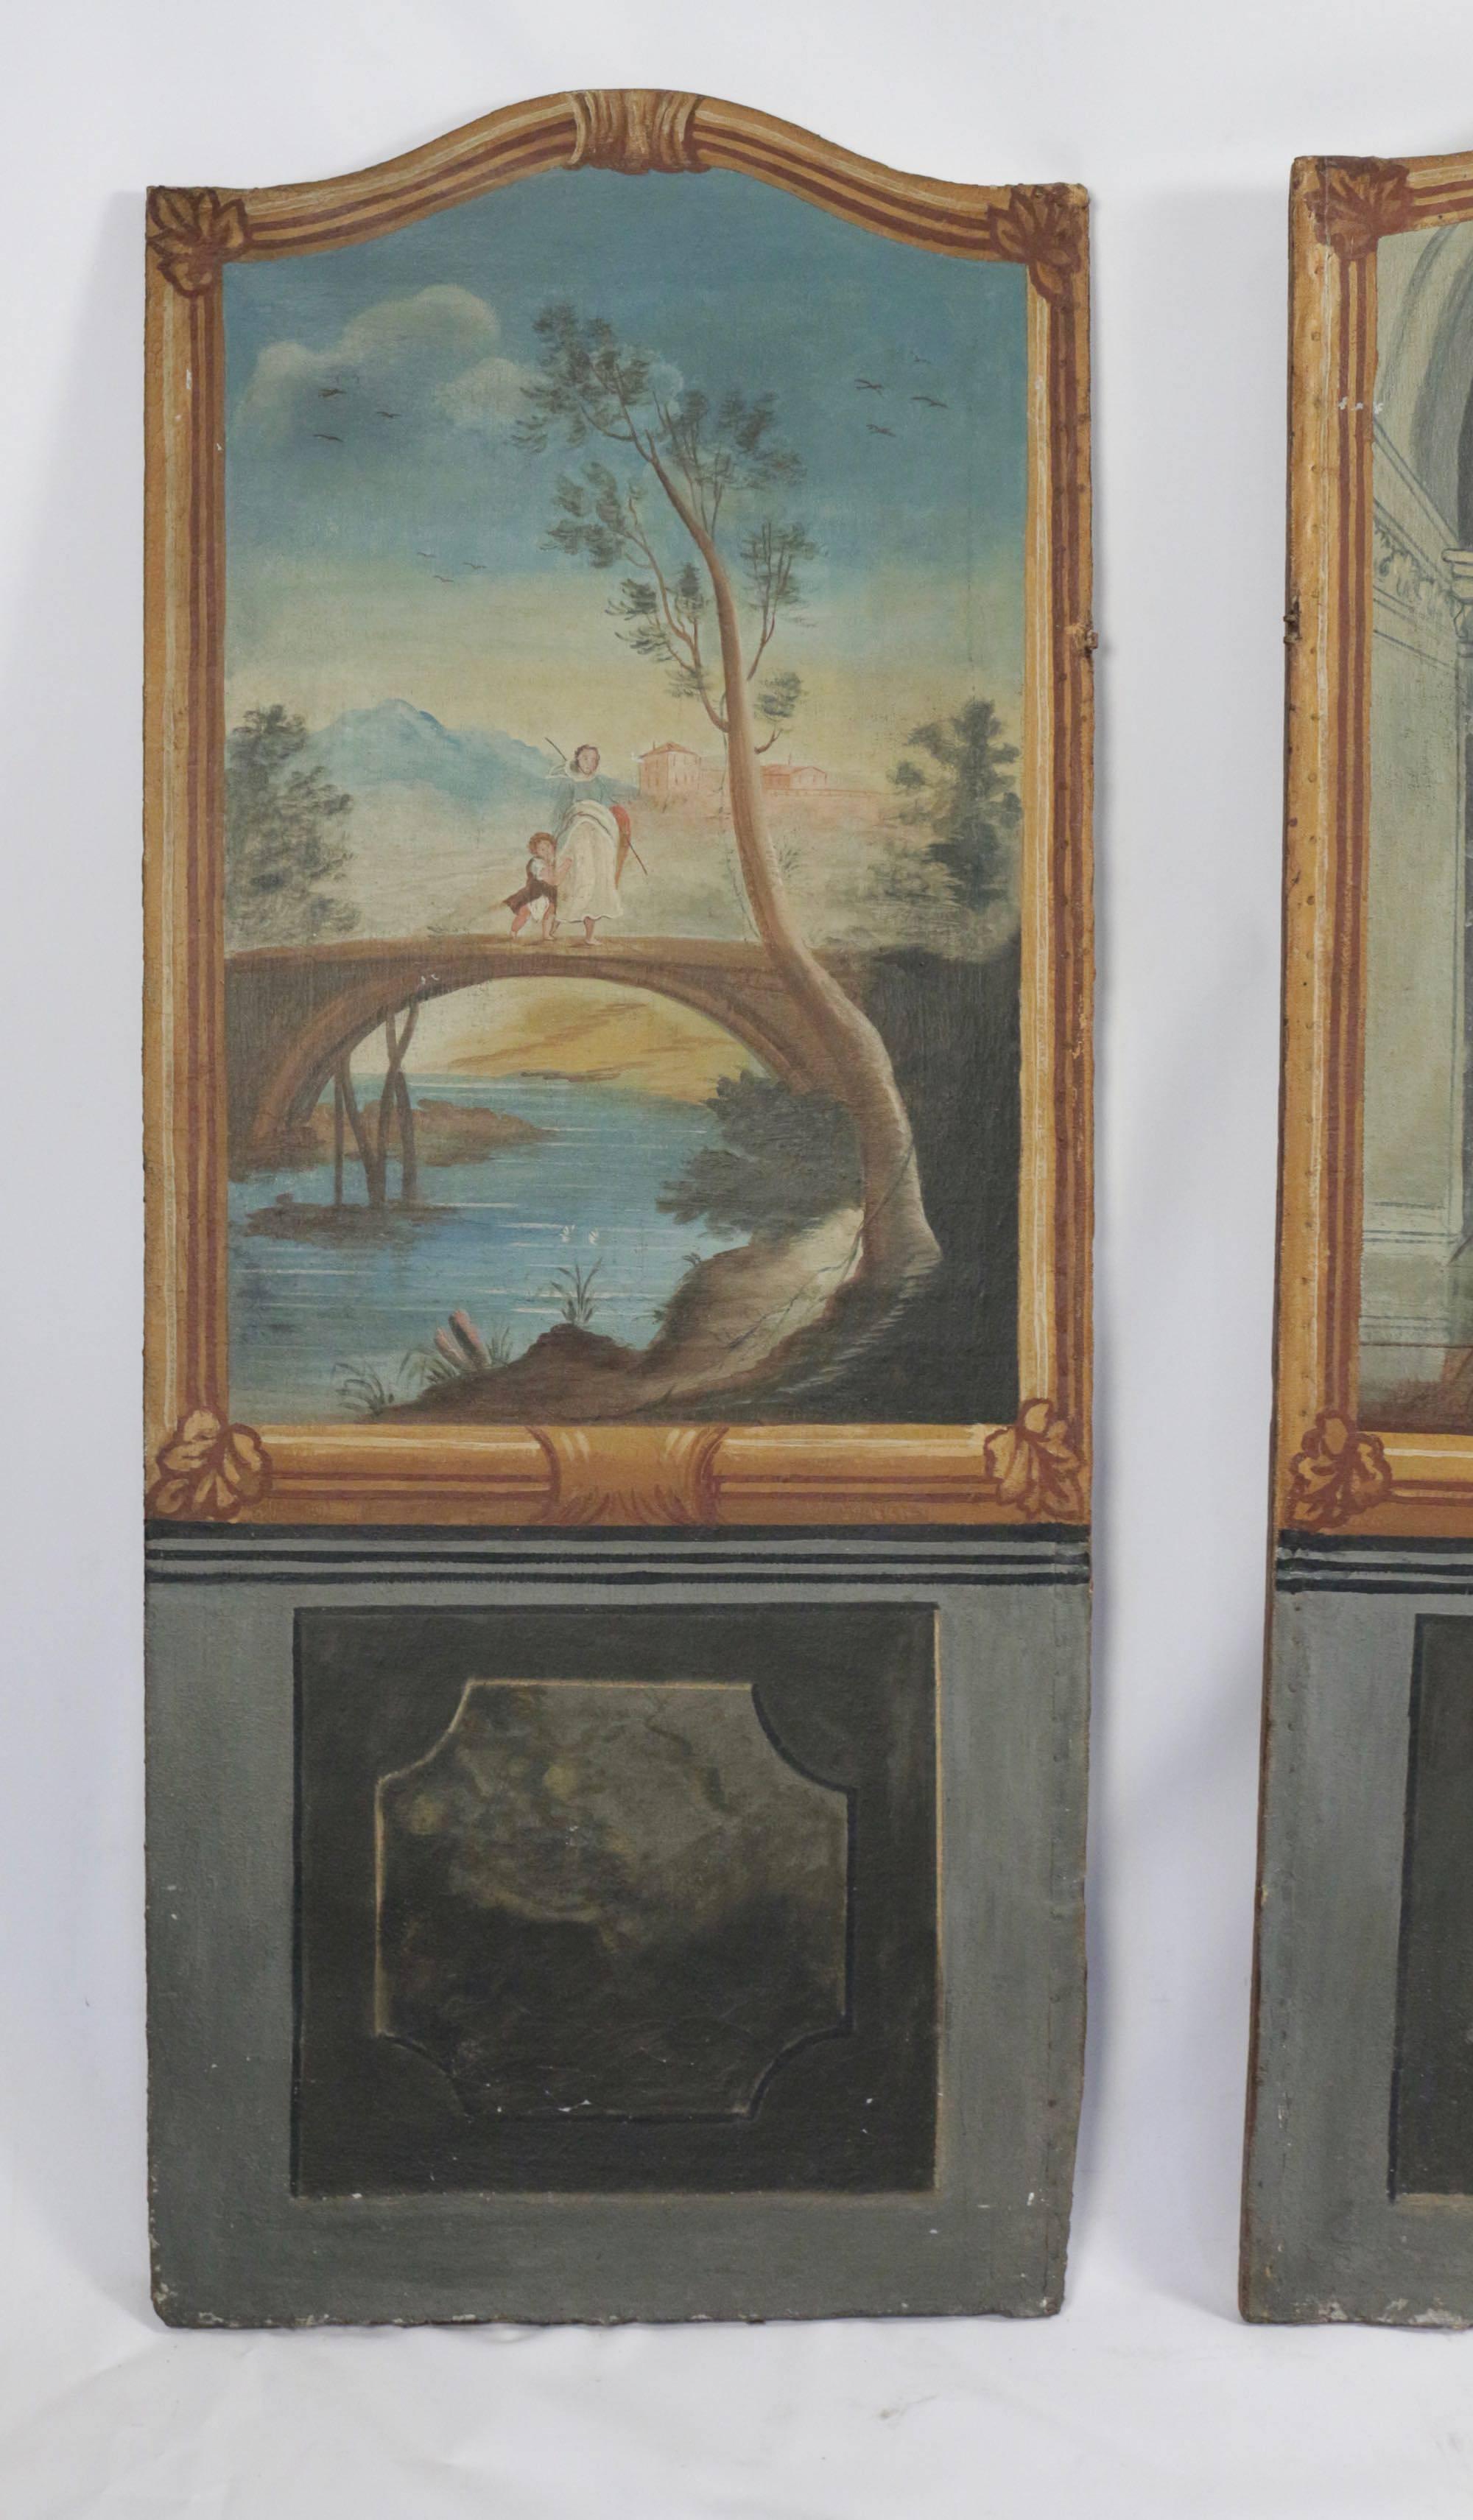 Very lovely decorative two-panel screen painted oil on canvas with Italian country scenes.
Italy late 18th century, circa 1795.